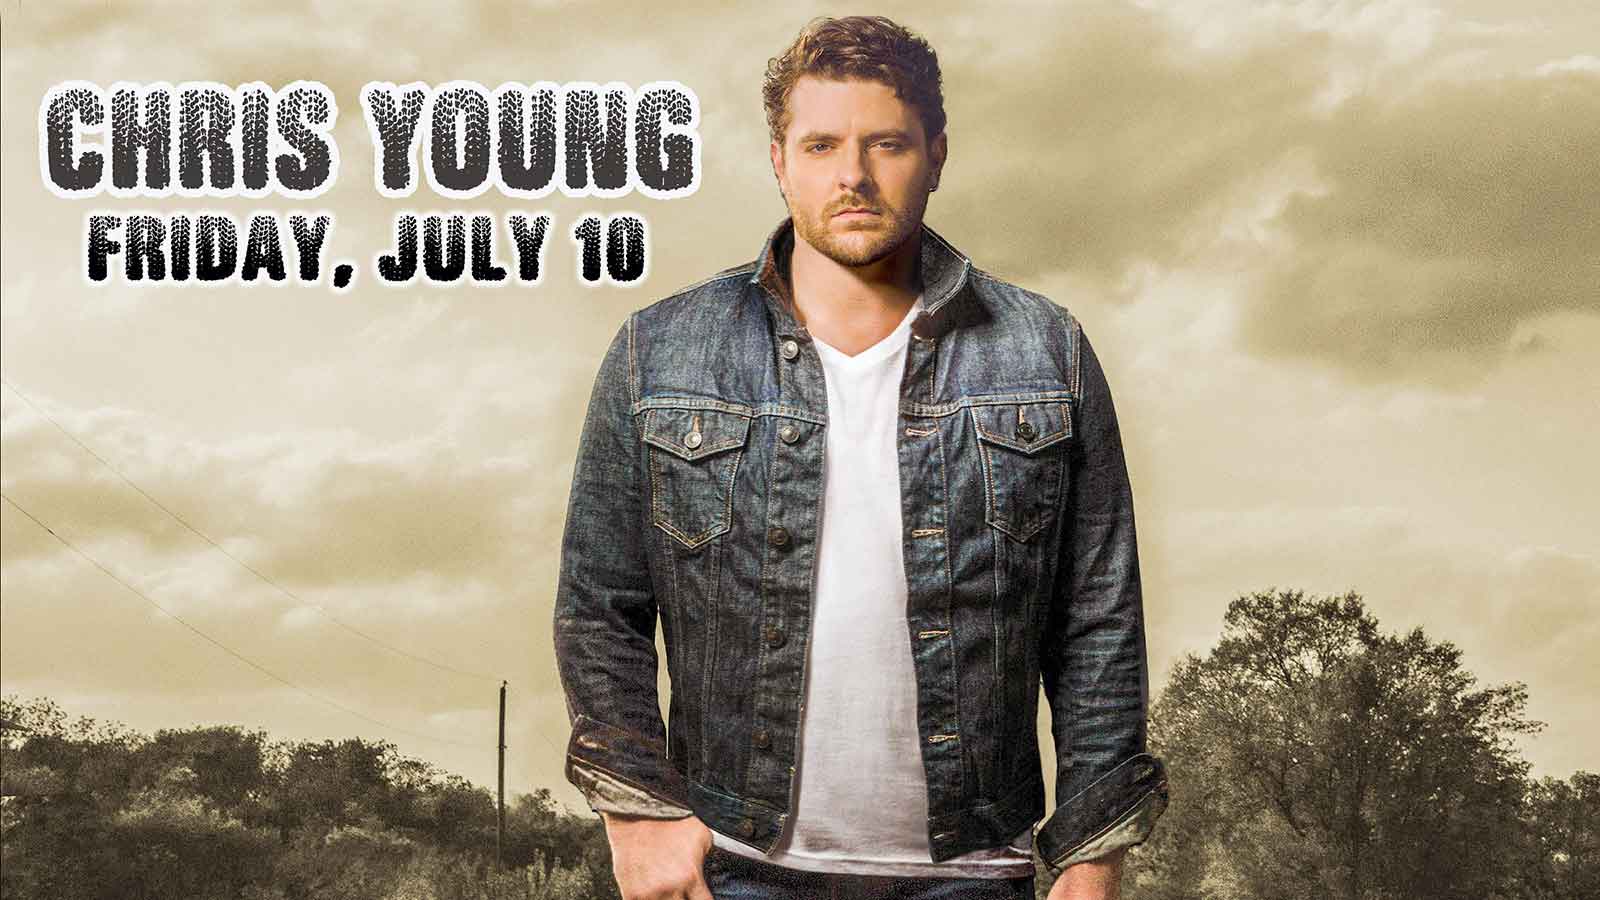 High Resolution Wallpaper | Chris Young 1600x900 px